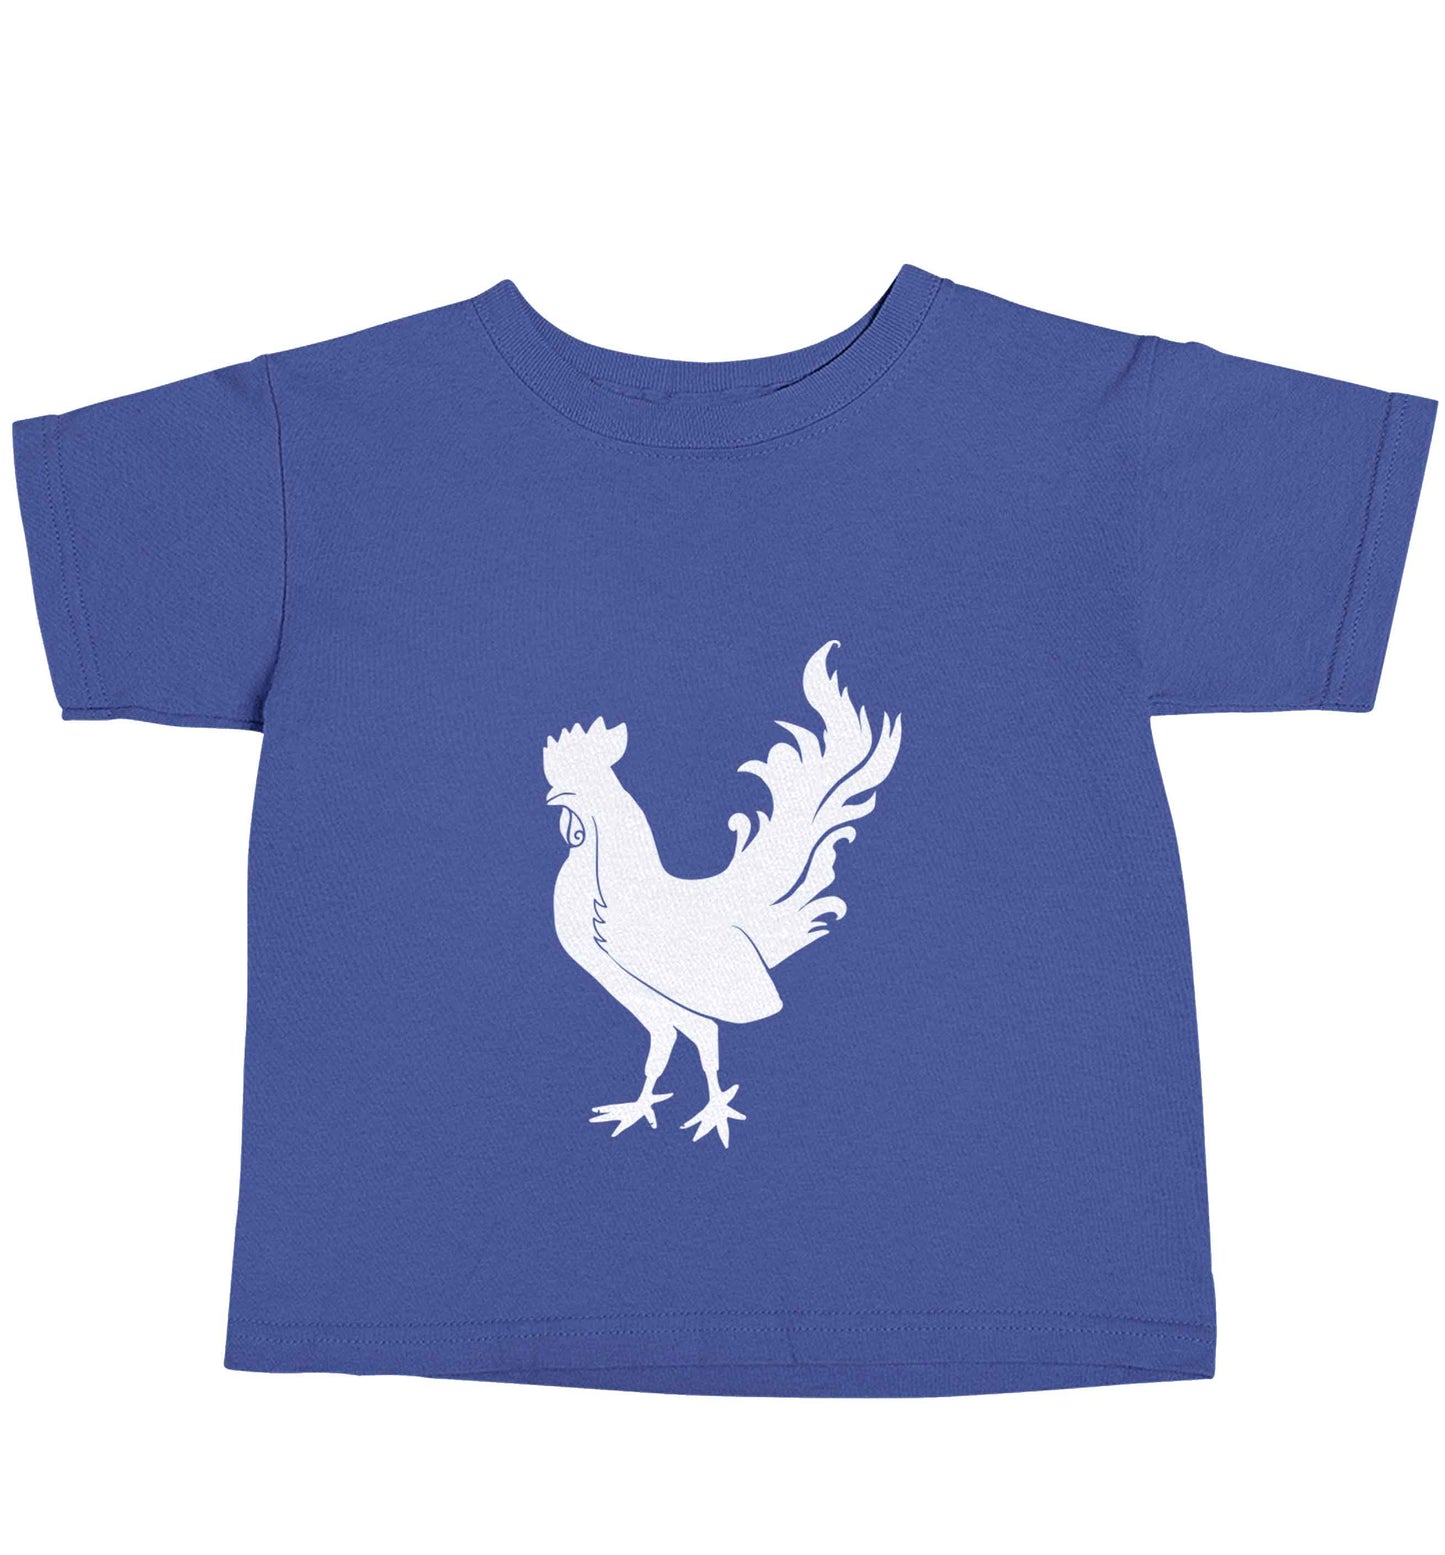 Rooster blue baby toddler Tshirt 2 Years